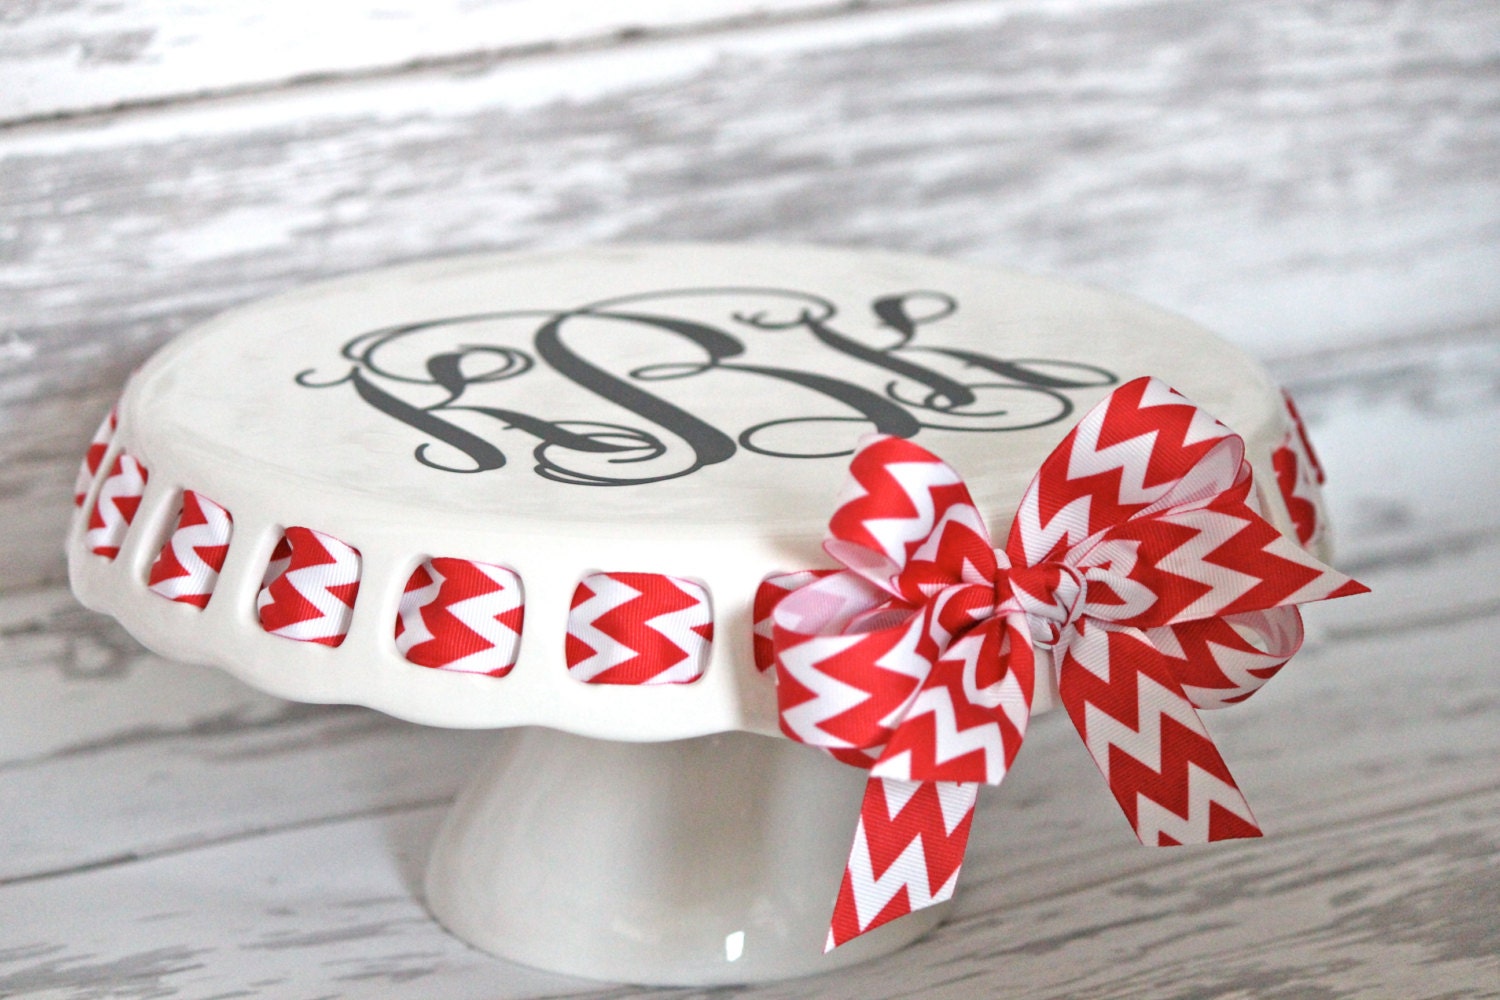 monogrammed ROUND CAKE STAND with decorative ribbon